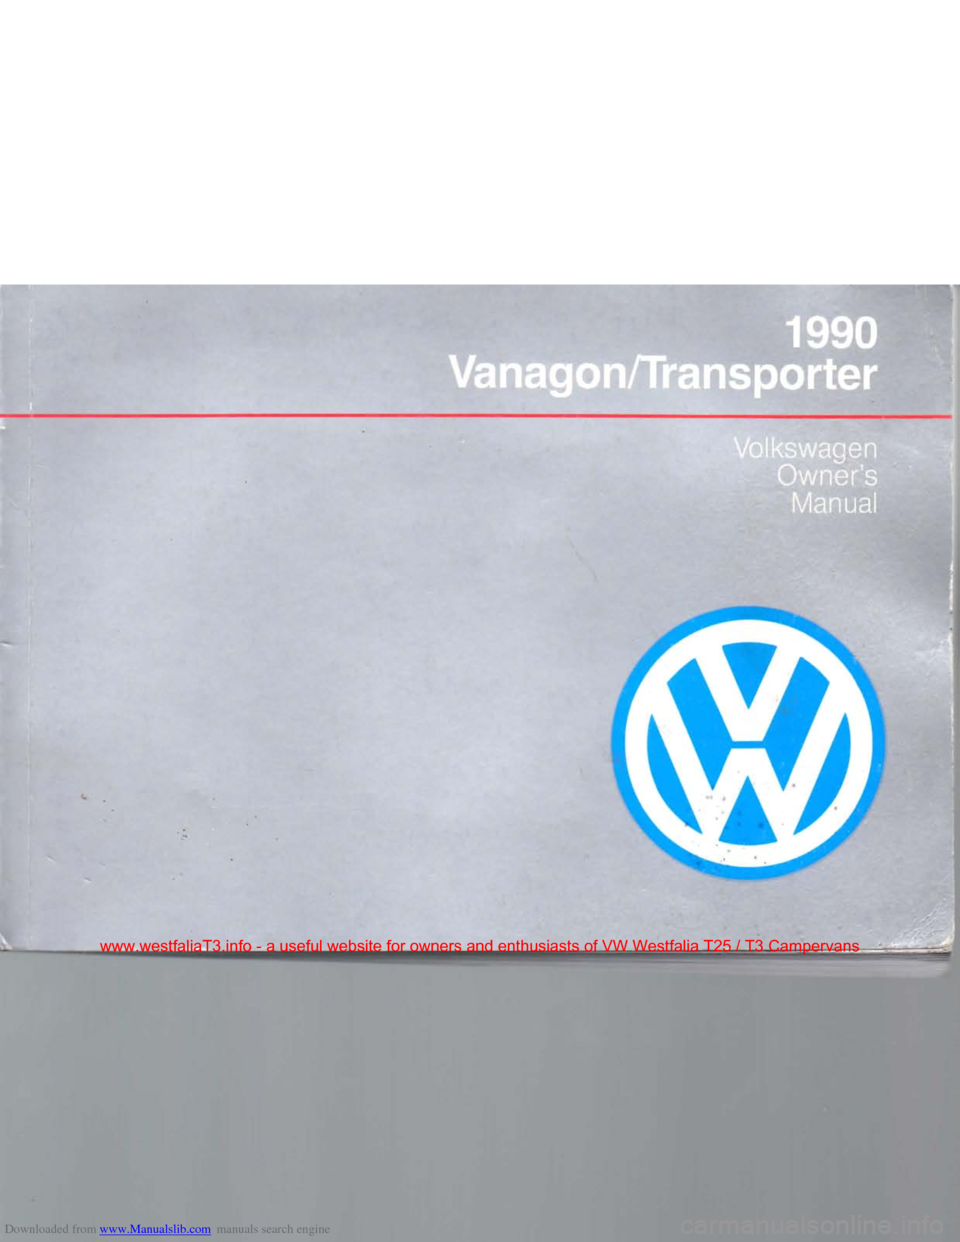 VOLKSWAGEN TRANSPORTER 1990 T4 / 4.G Owners Manual Downloaded from www.Manualslib.com manuals search engine 
porter 

wners 

Manual 
 
 
www.westfaliaT3.info  - a  useful  website  for owners  and enthusiasts  of VW  Westfalia  T25 / T3  Campervans 